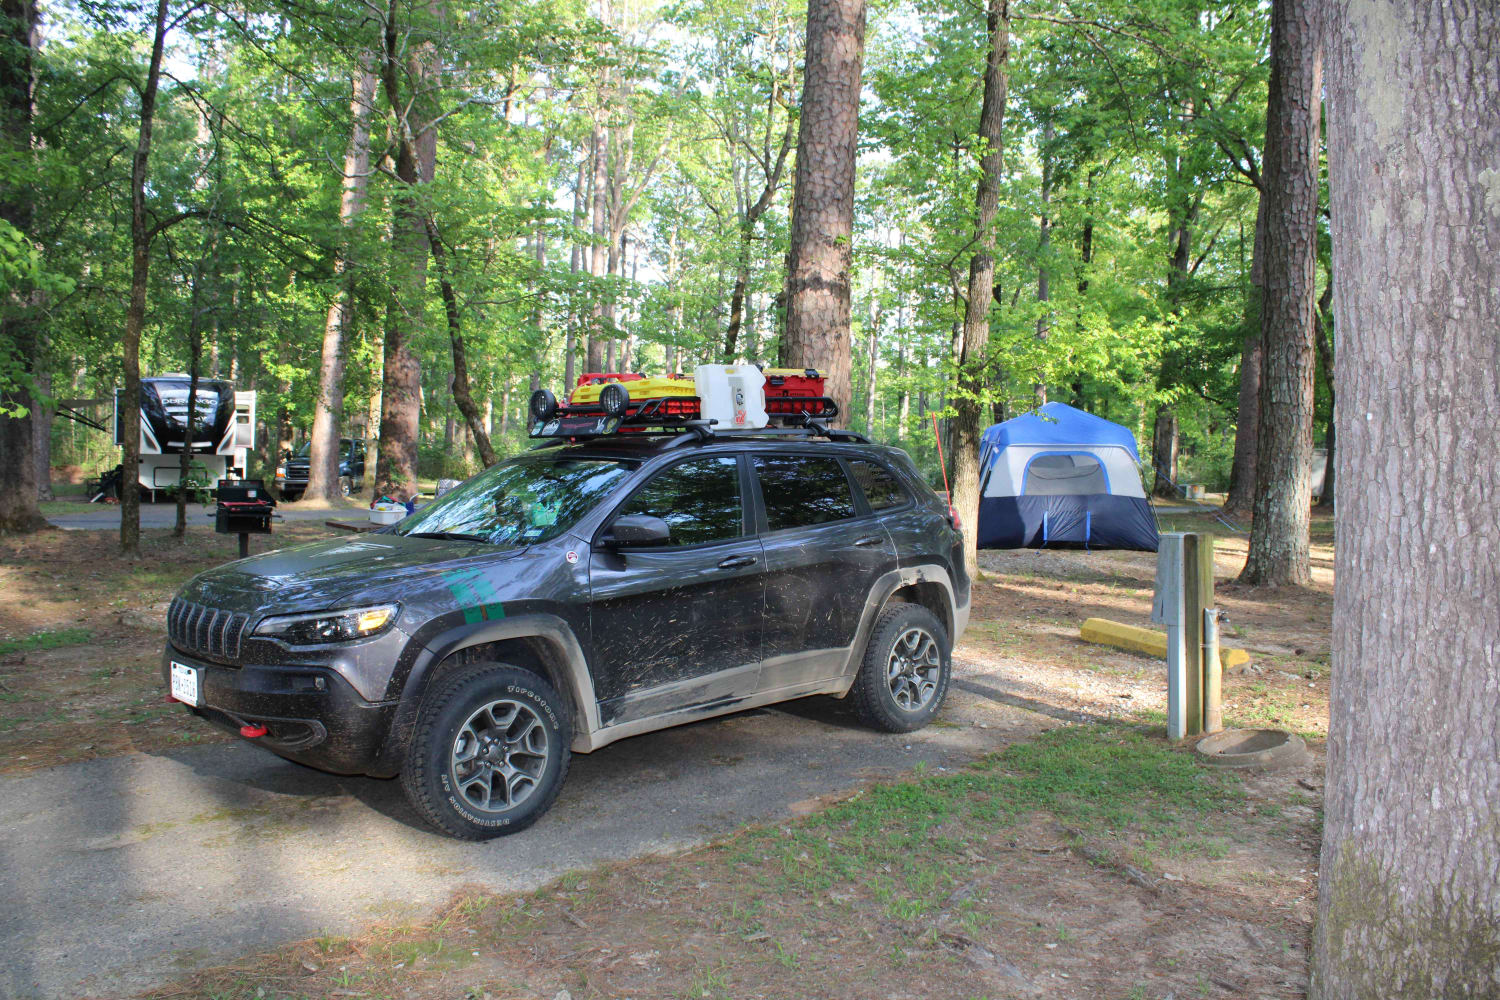 The Arkansas Overland Route - TrailHawk Loop - Section 21 - Haus SP